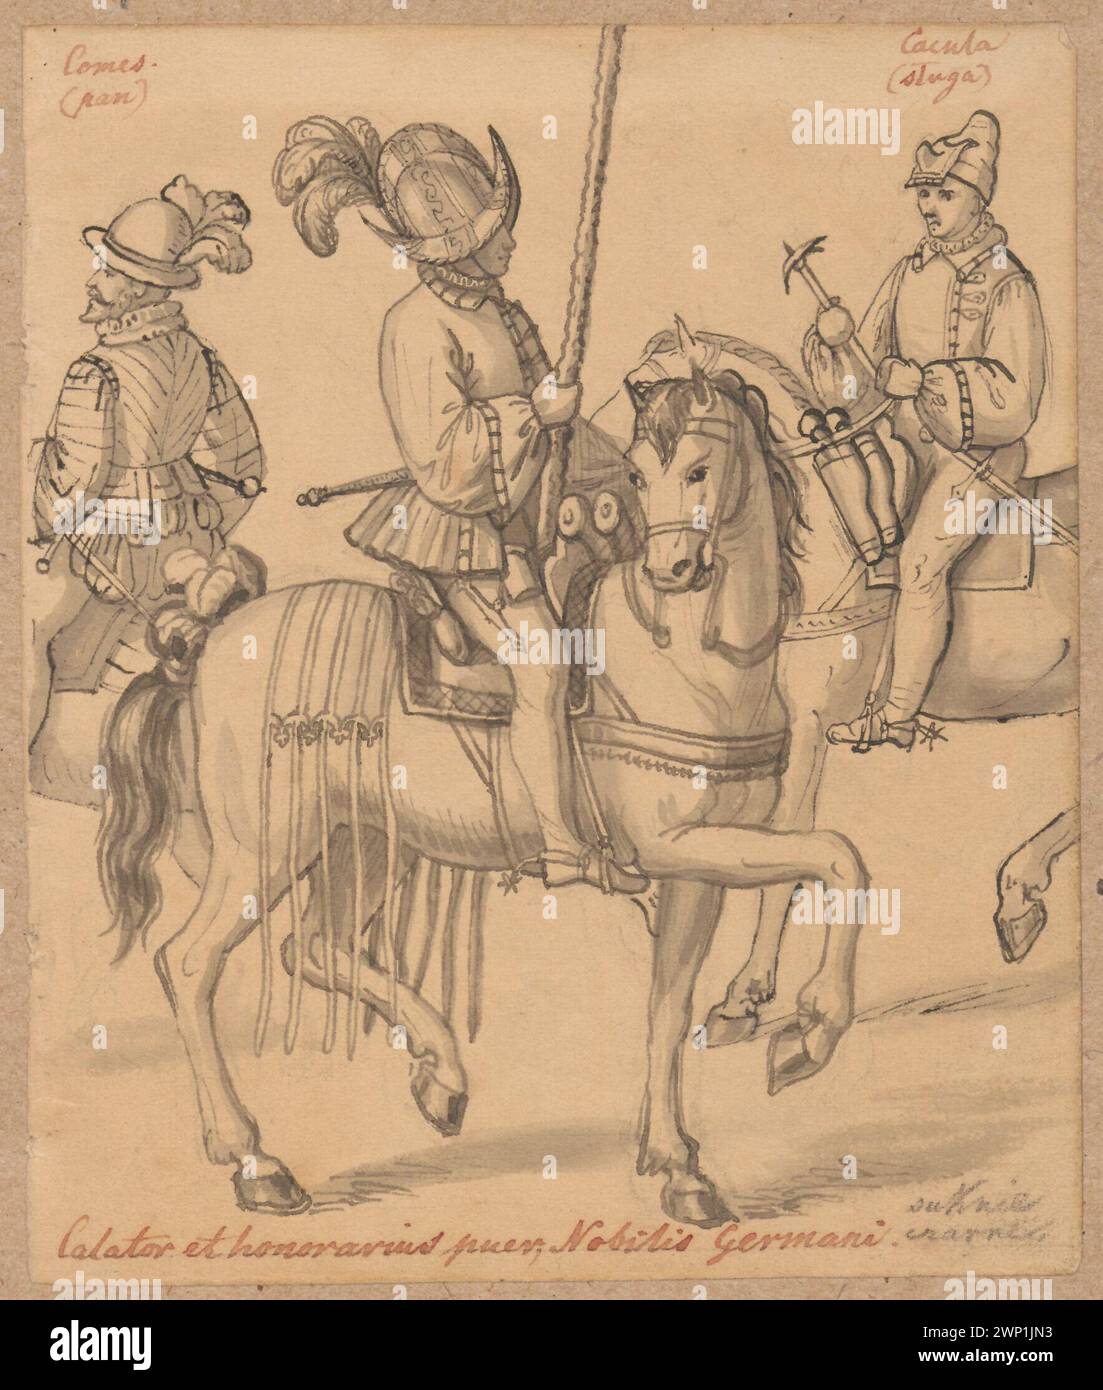 Three young people on horses in the armor, according to the engraving by Abraham de Bruyn from 'Diversarum Gentium Gentium Armatura Equestris. Ubi Fere Europae, Asiae Atque Africae Equitandi Ratio Propria Expressa Est', boards No. 4, 7 and 8; Lesser, Aleksander (1814-1884), Bruyn, Abraham de (1540-1587); 1830-1884 (1830-00-00-1884-00-00);Bruyn, Abraham de (Ca 1540-1587), Bruyn, Abraham de (Ca 1540-1587)-reproduction, Kazimierz (Kraków-district), Lesser, Aleksander (1814-1884), Lesser, Emiljan Stanisław (Baron-1847-1912 ), Lesser, Emiljan Stanisław (Baron - 1847-1912) - collection, Lesser, Wikt Stock Photo